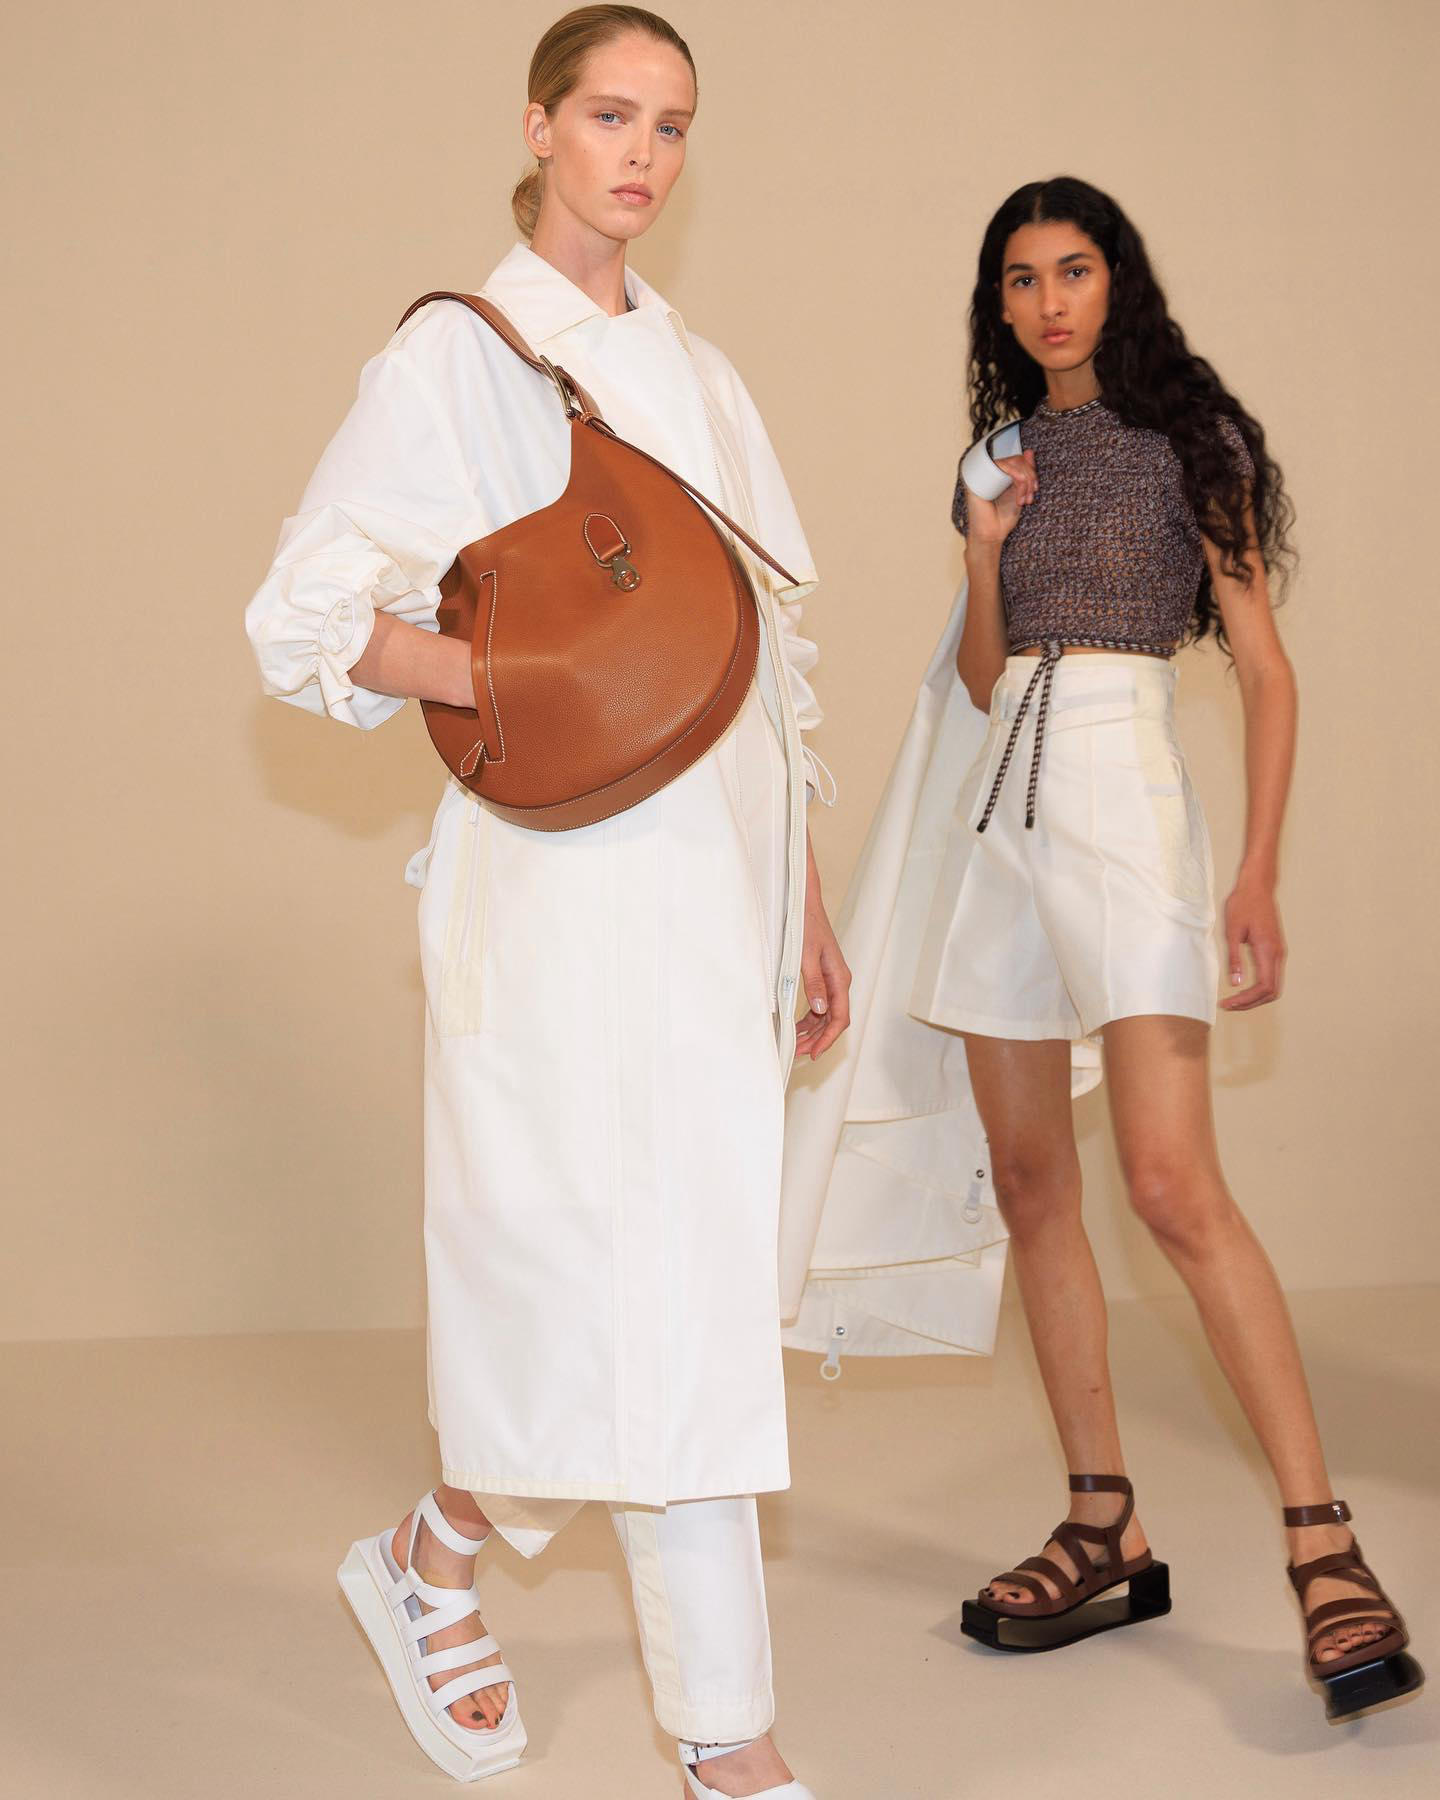 image  1 Vogue - Today at the Tennis Club de Paris, #hermes spring 2023 brought warm neutrals and abstract ge